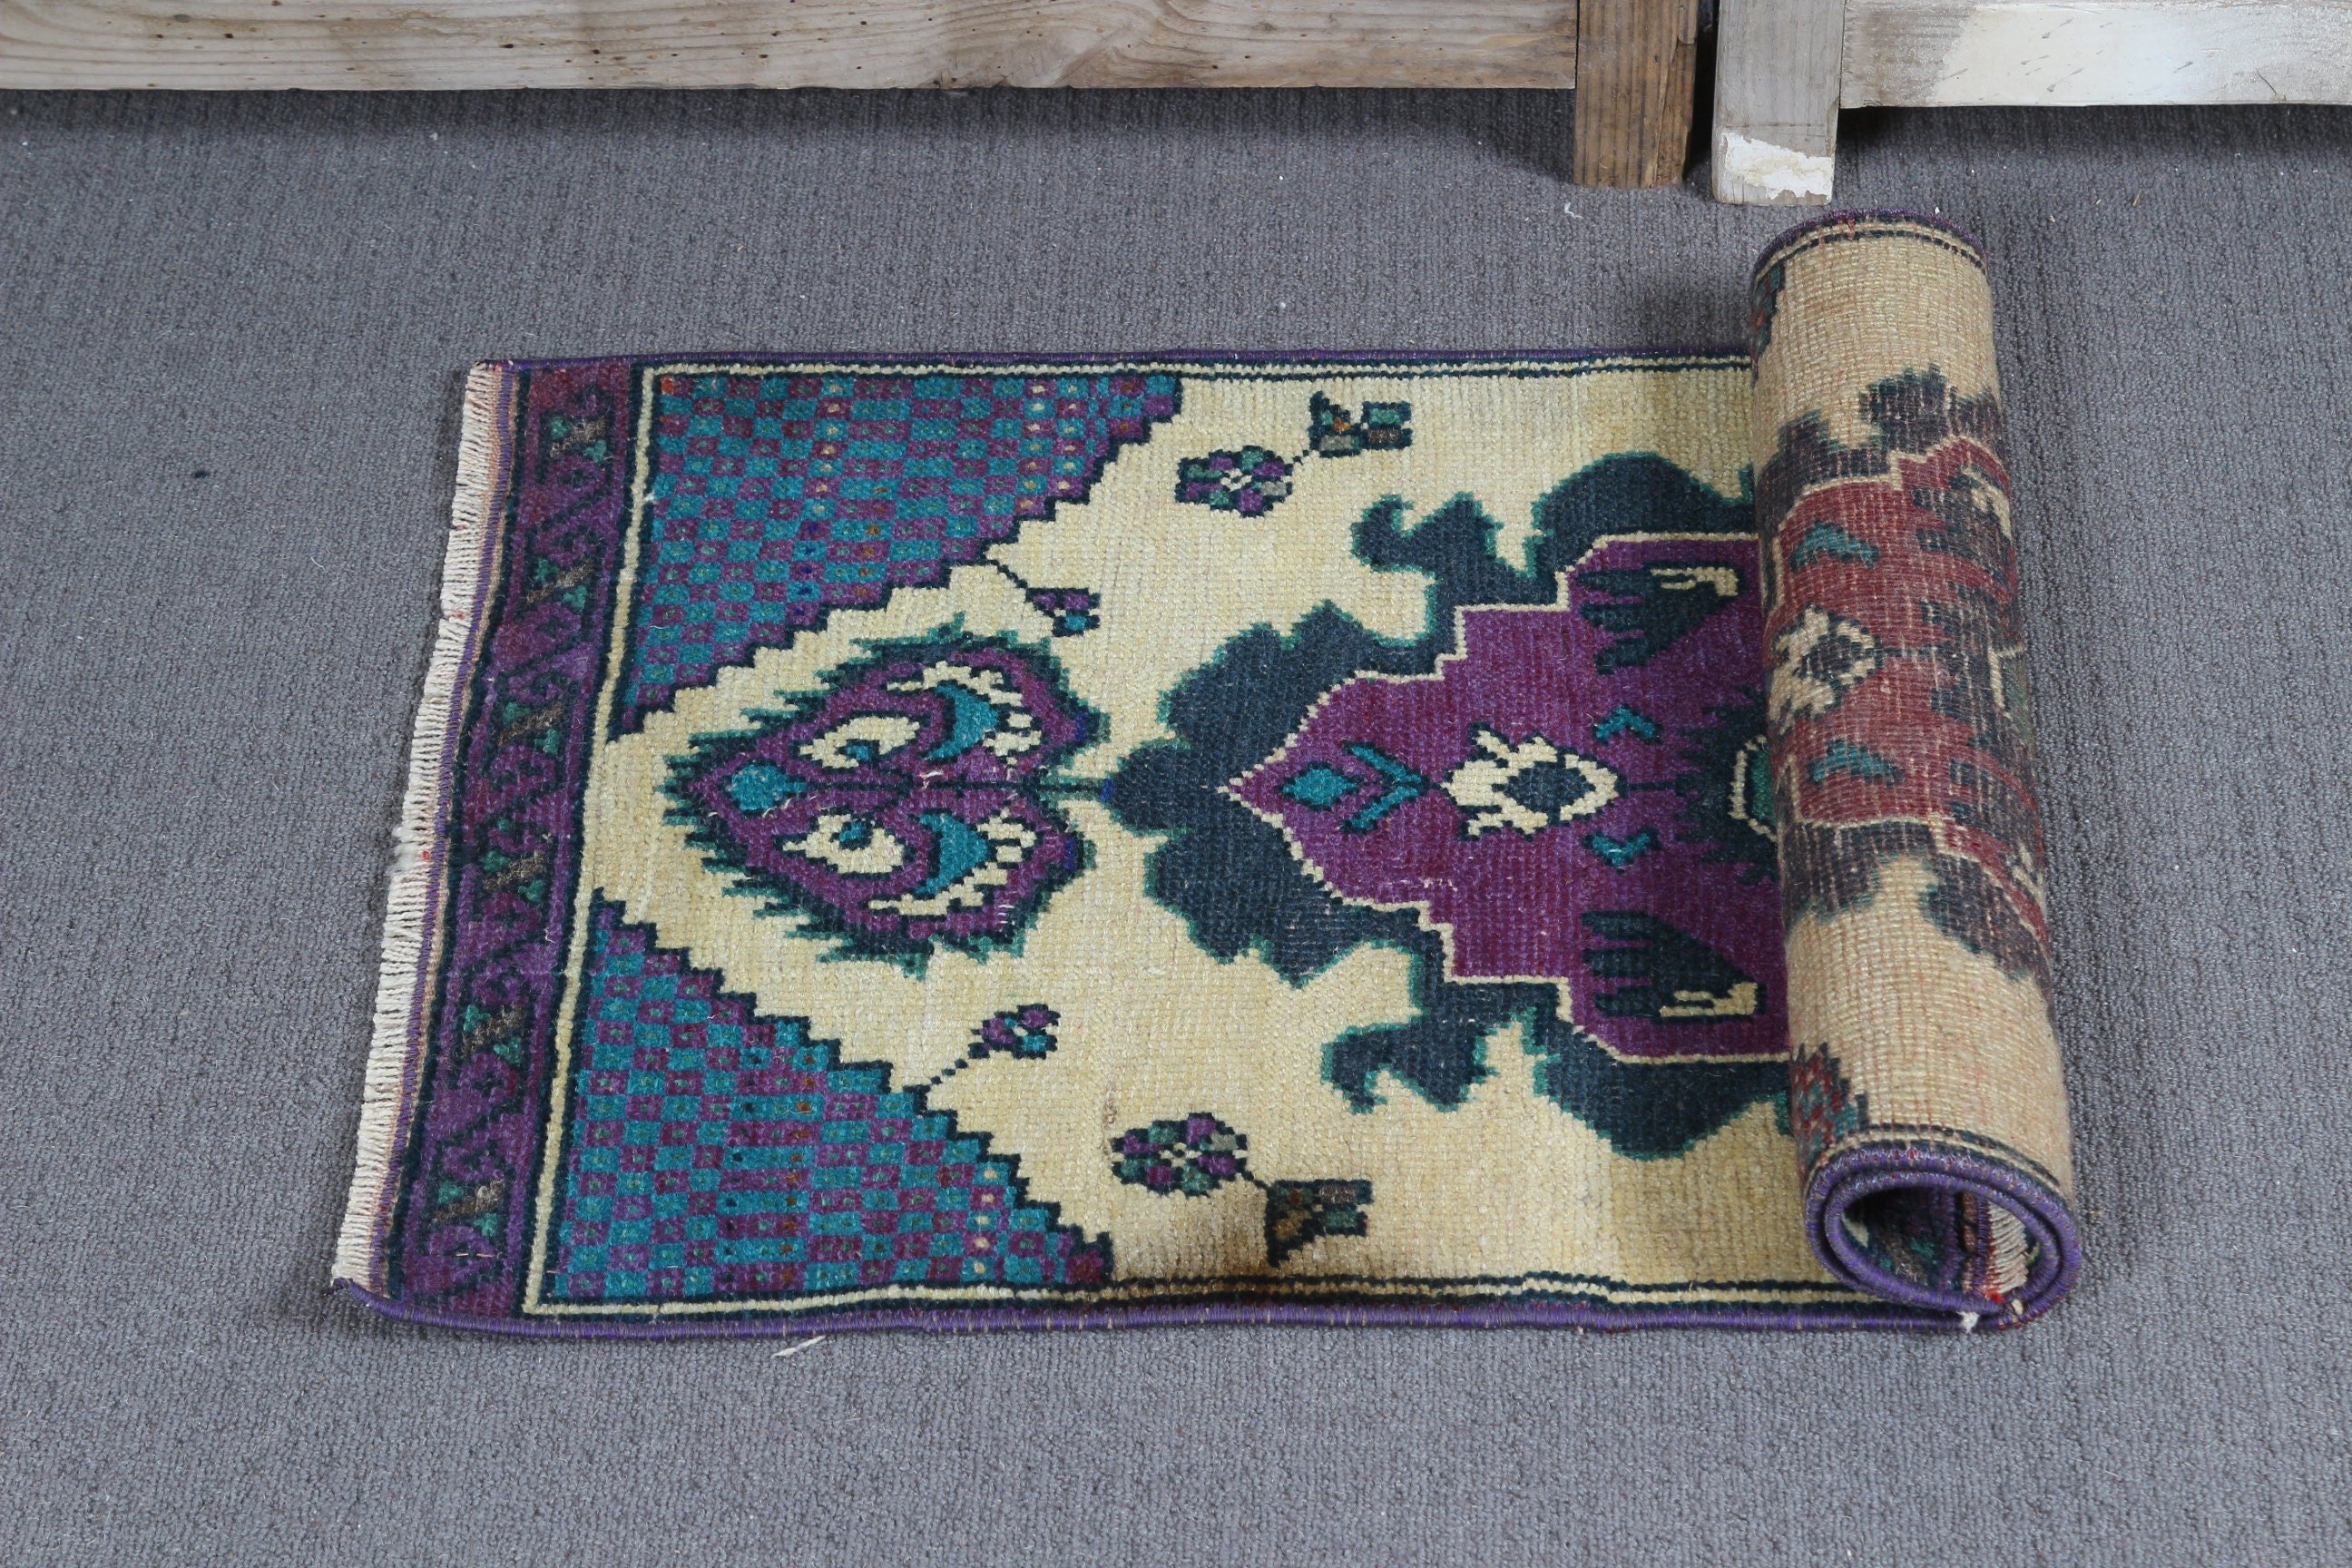 Oriental Rugs, Kitchen Rug, Entry Rug, Vintage Rugs, Purple Bedroom Rugs, Rugs for Bath, Turkish Rug, Home Decor Rug, 1.5x3 ft Small Rug